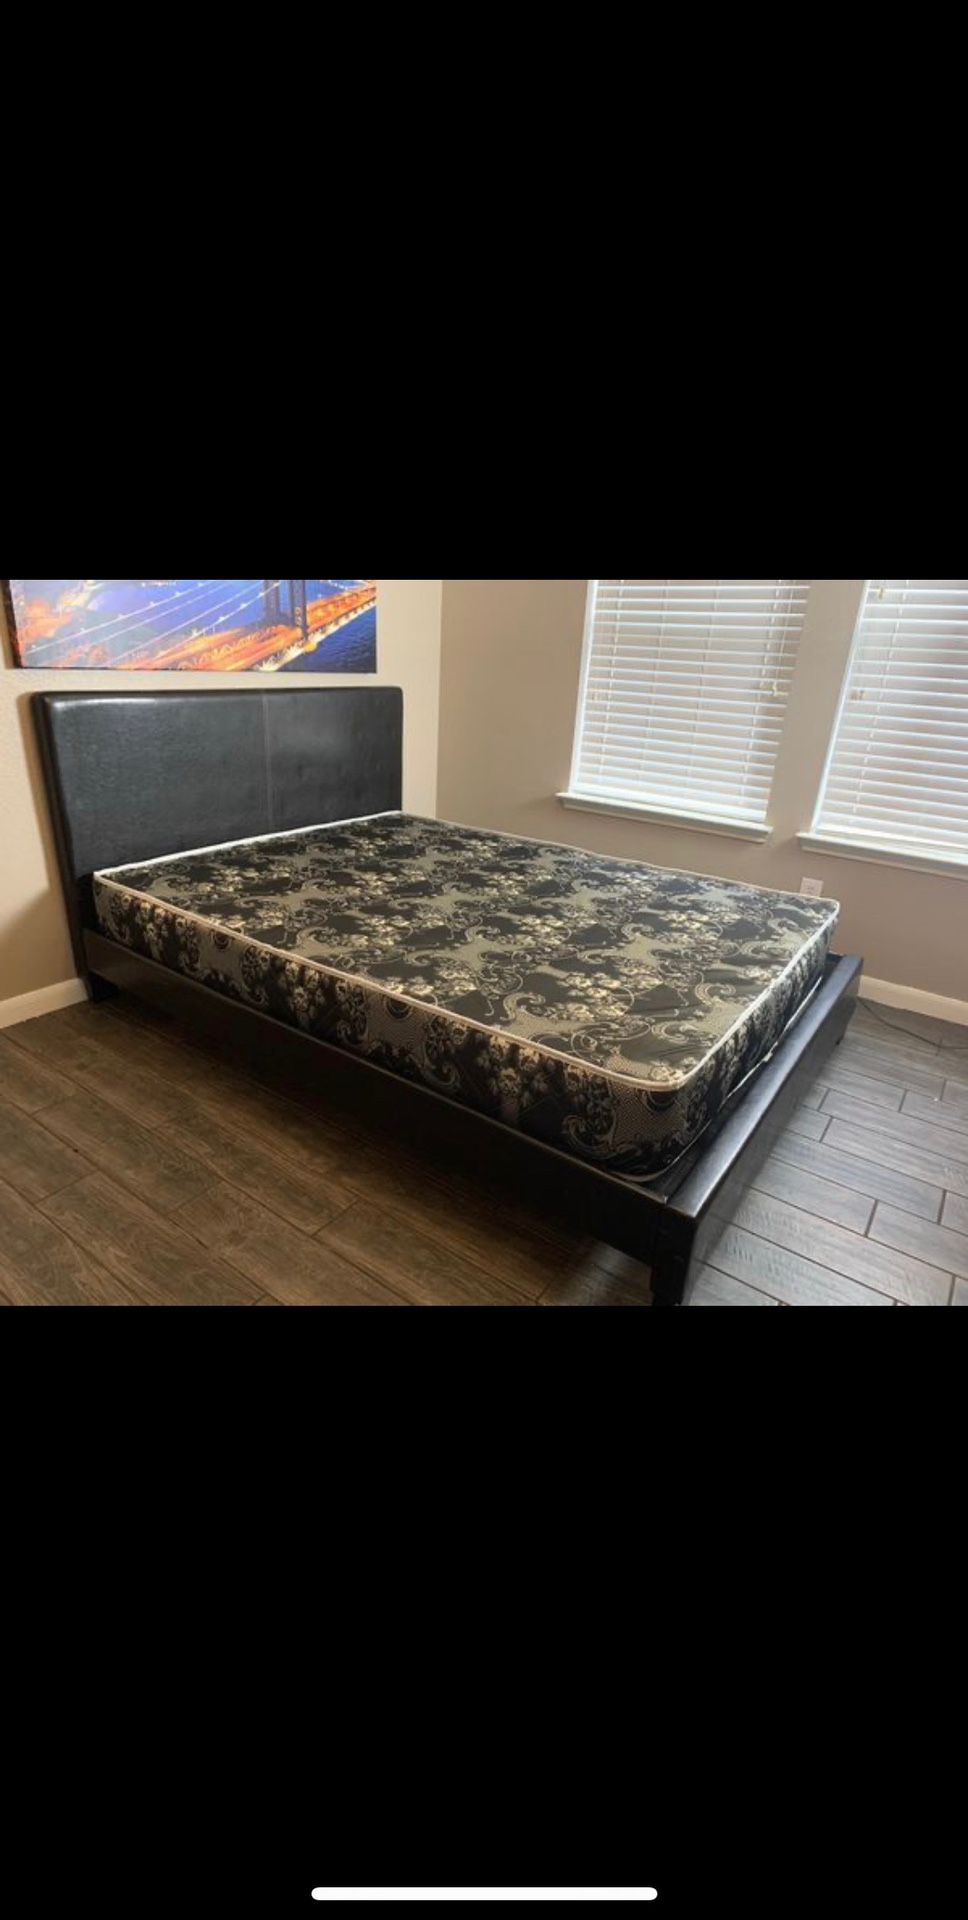 Brand New Queen Size Platform Bed With Plush Mattress Included (Free Delivery)